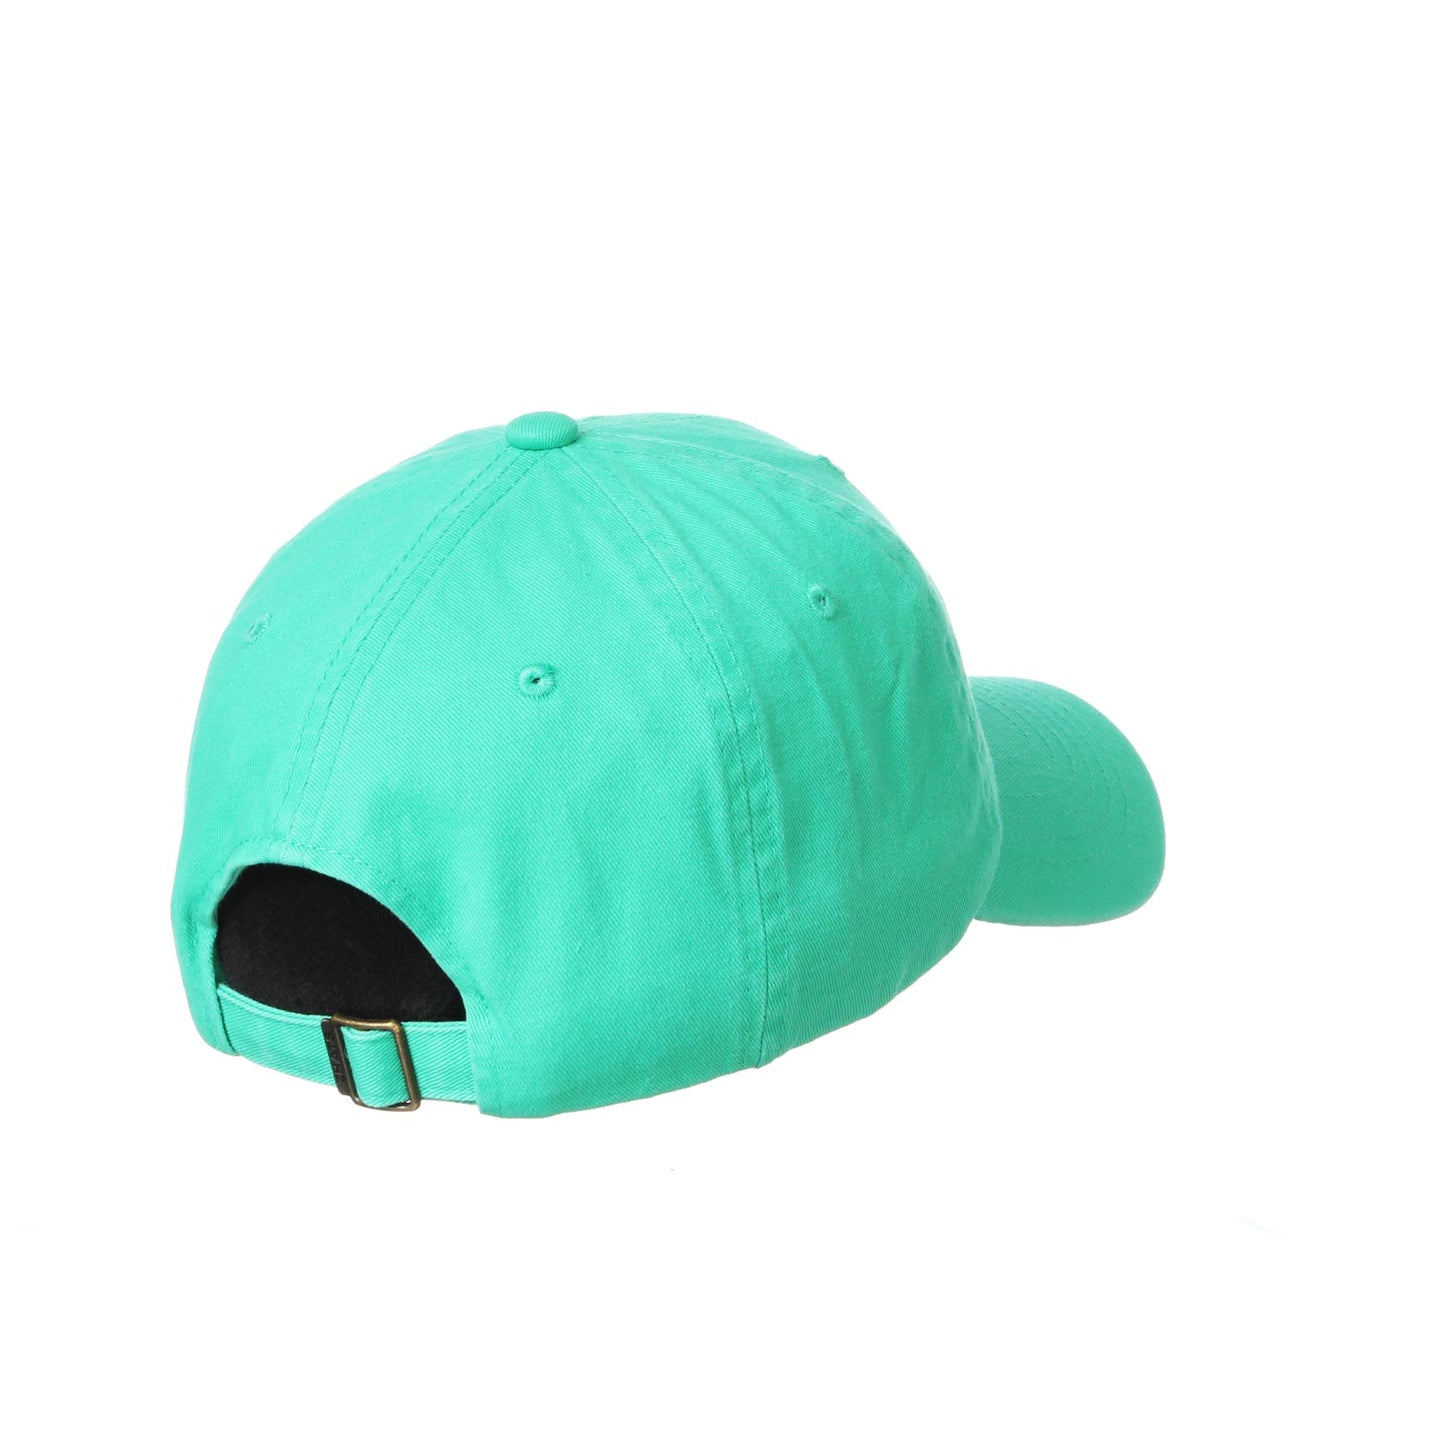 Triumph Scholarship Relaxed Fit Adjustable Hat - Sea Foam Green